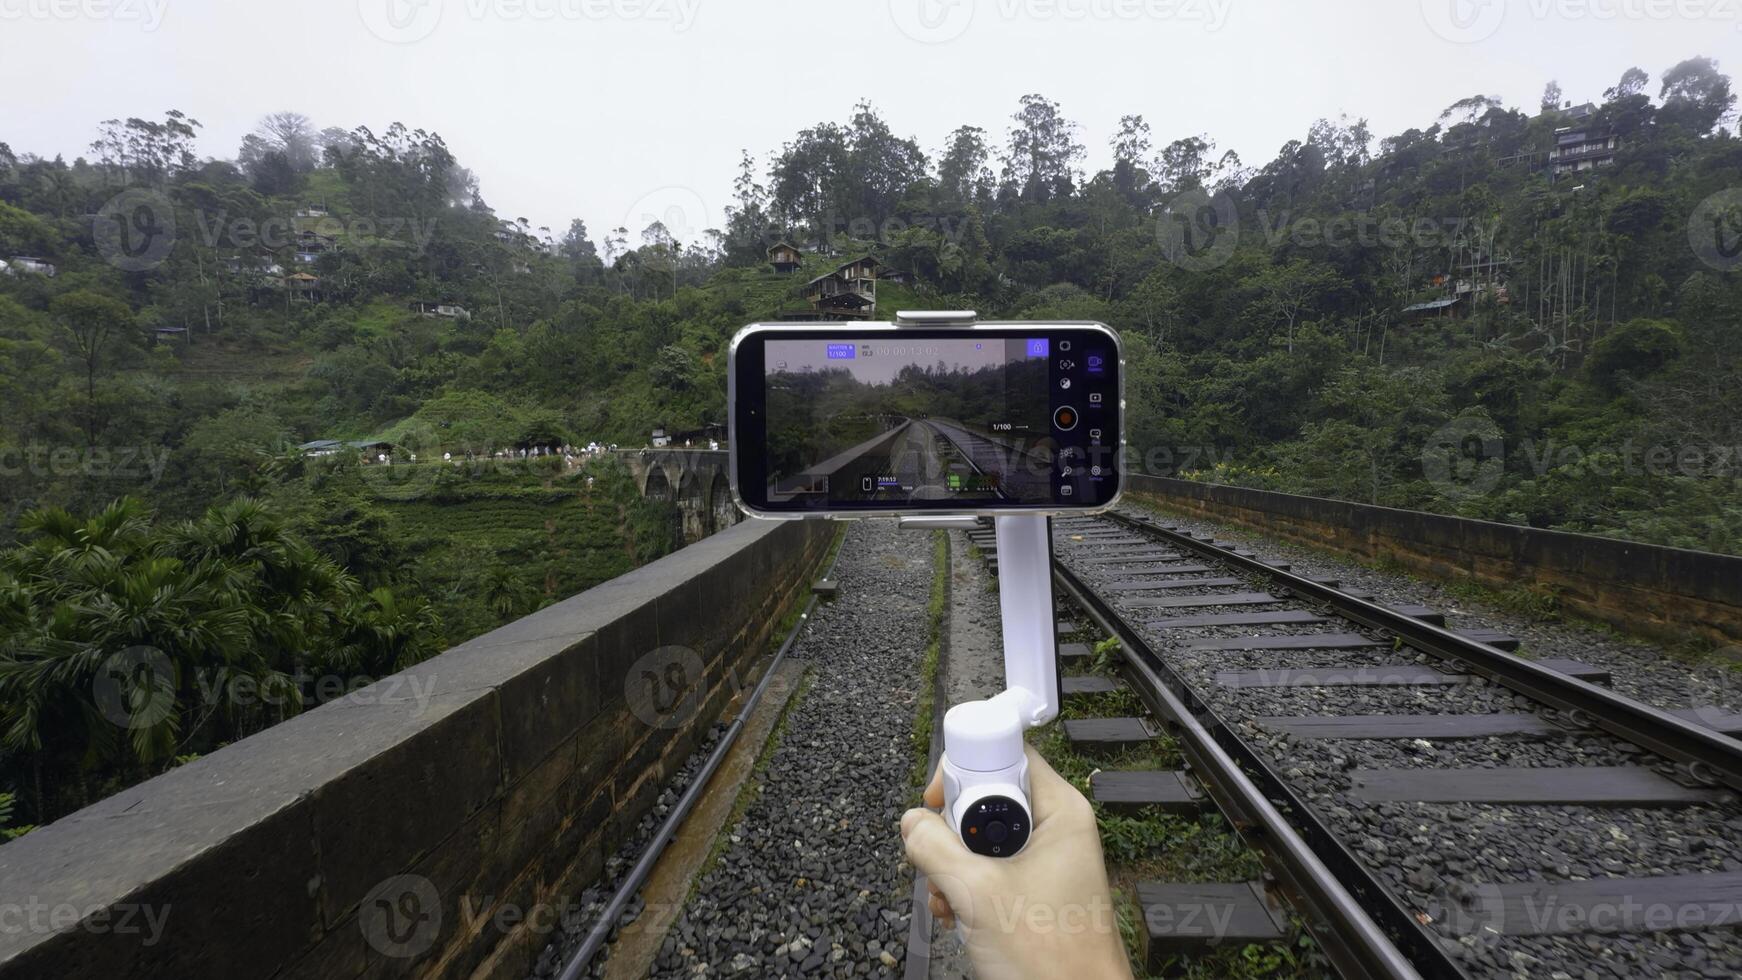 Shooting on tripod phone while traveling. Action. Shooting video on phone with stabilizer while traveling. Shooting bridge with railway in jungle on phone for blog photo